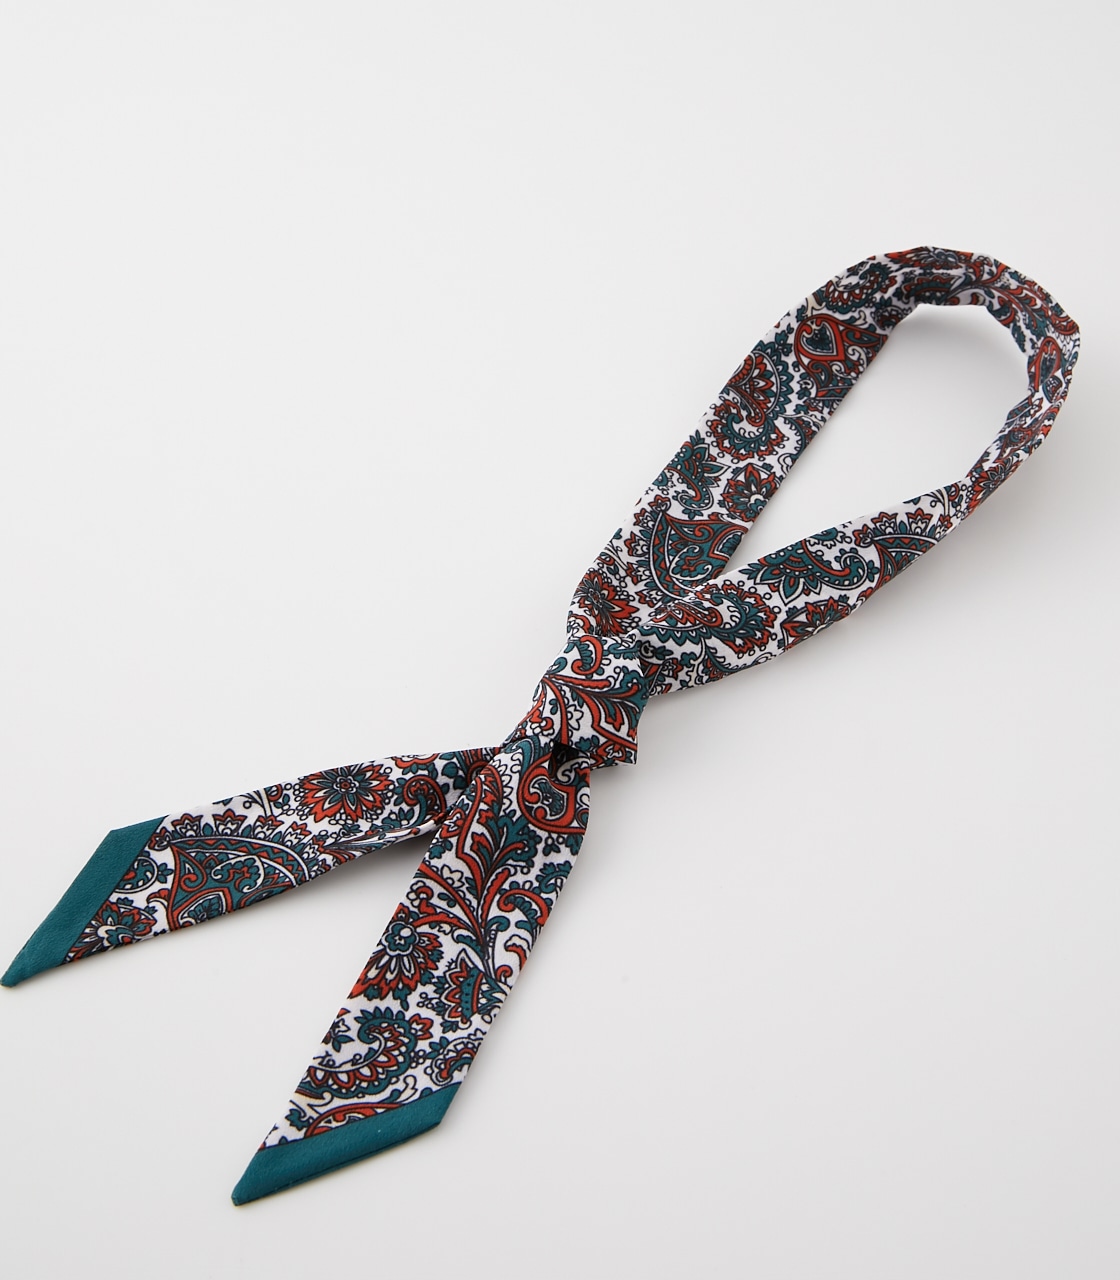 FLOWER PAISLEY SCARF NECKLACE/フラワーペイズリースカーフネックレス 詳細画像 柄KHA 6